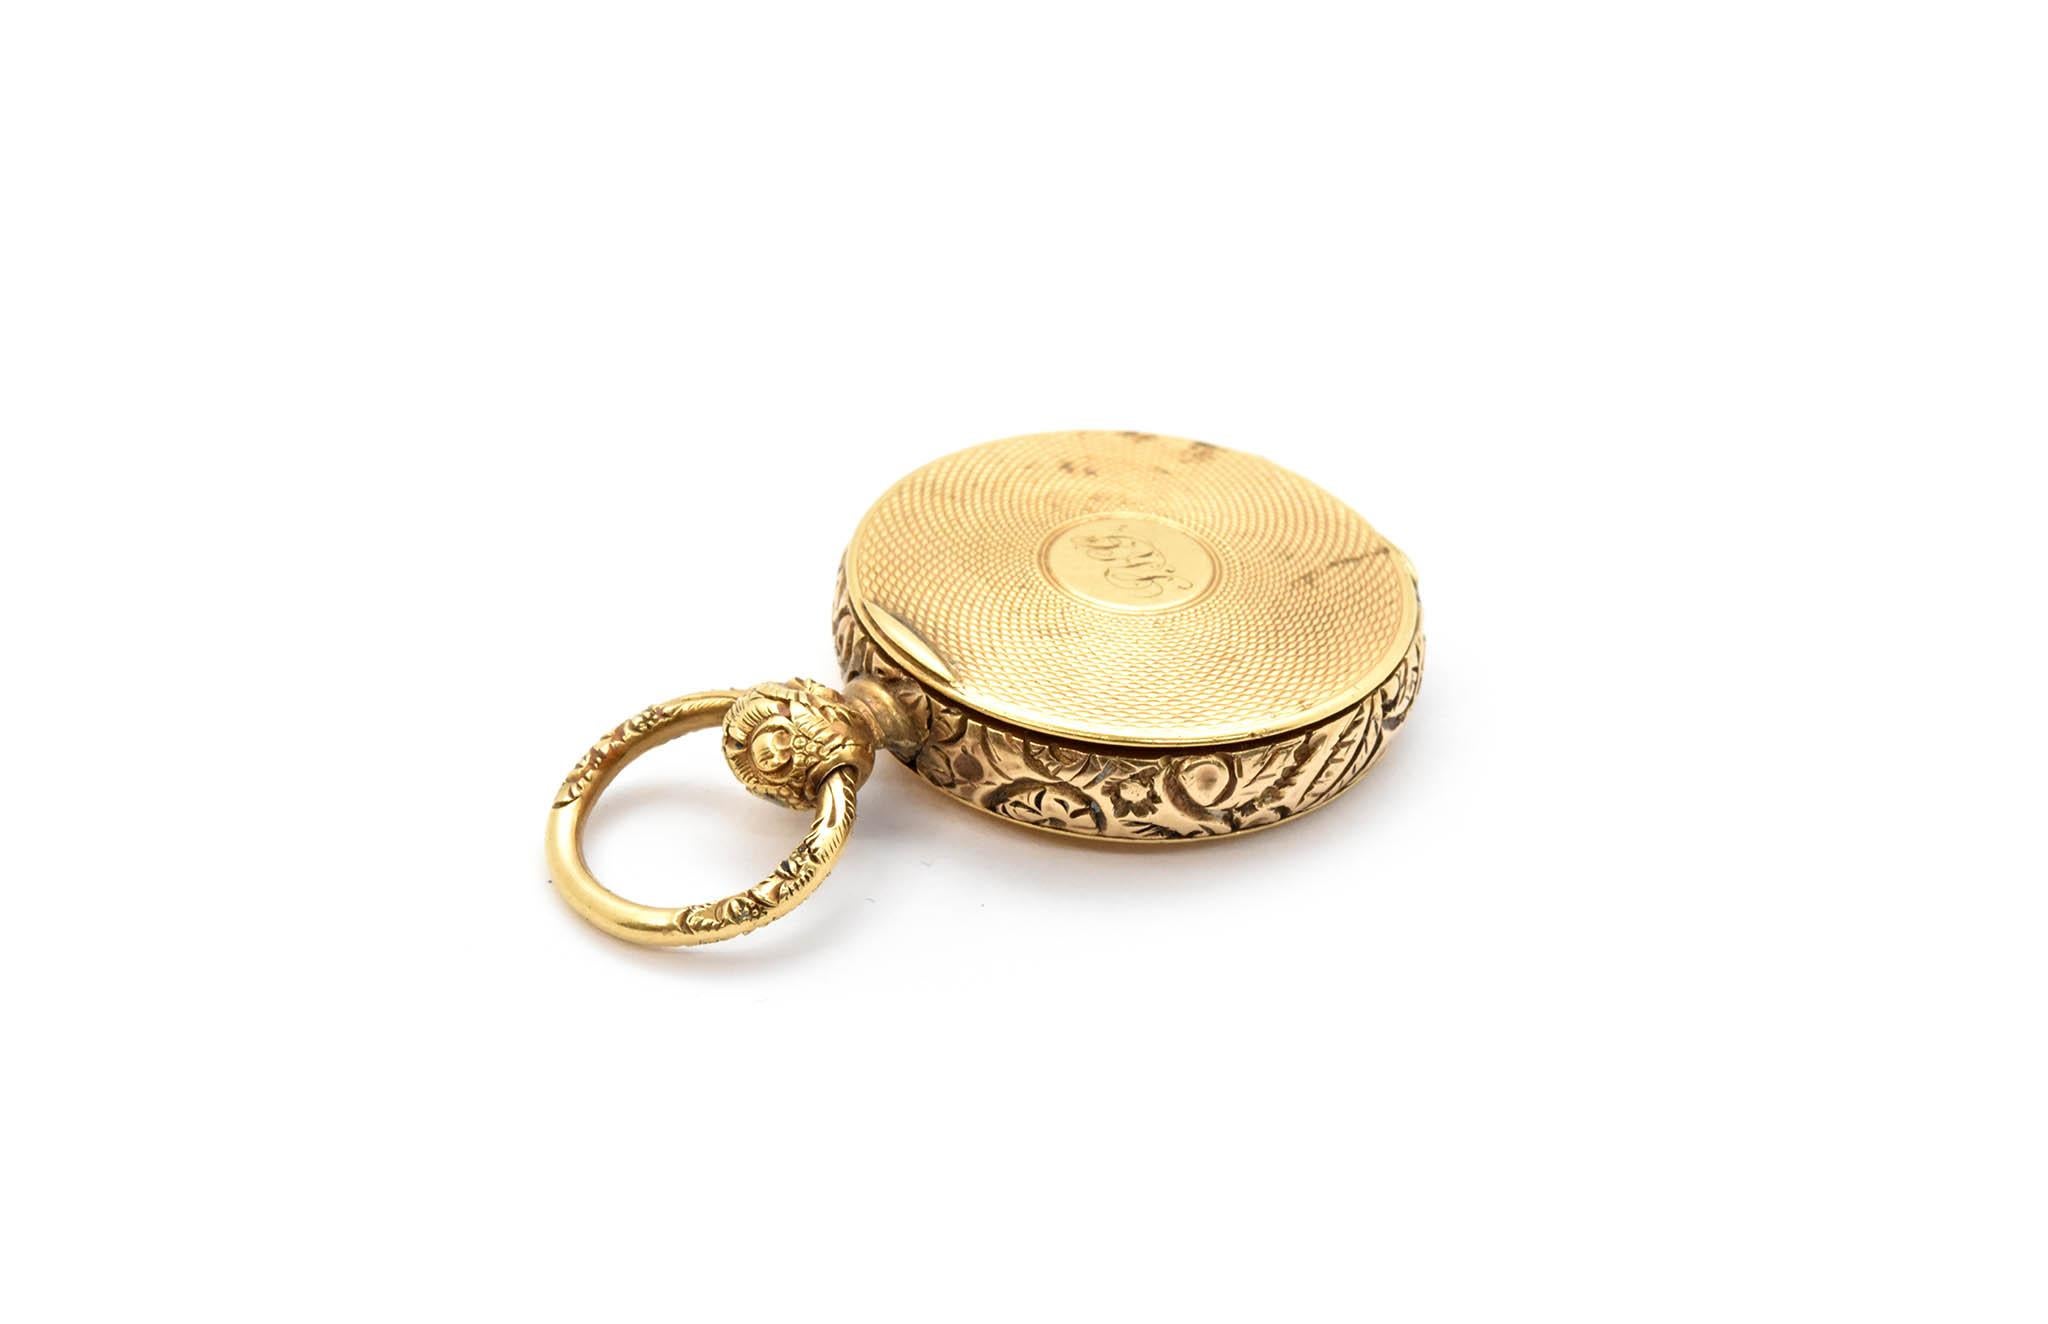 This locket is made in 14k yellow gold. It measures 26mm wide and 42mm tall. The piece weighs 17.93 grams. The front of the locket is monogrammed.